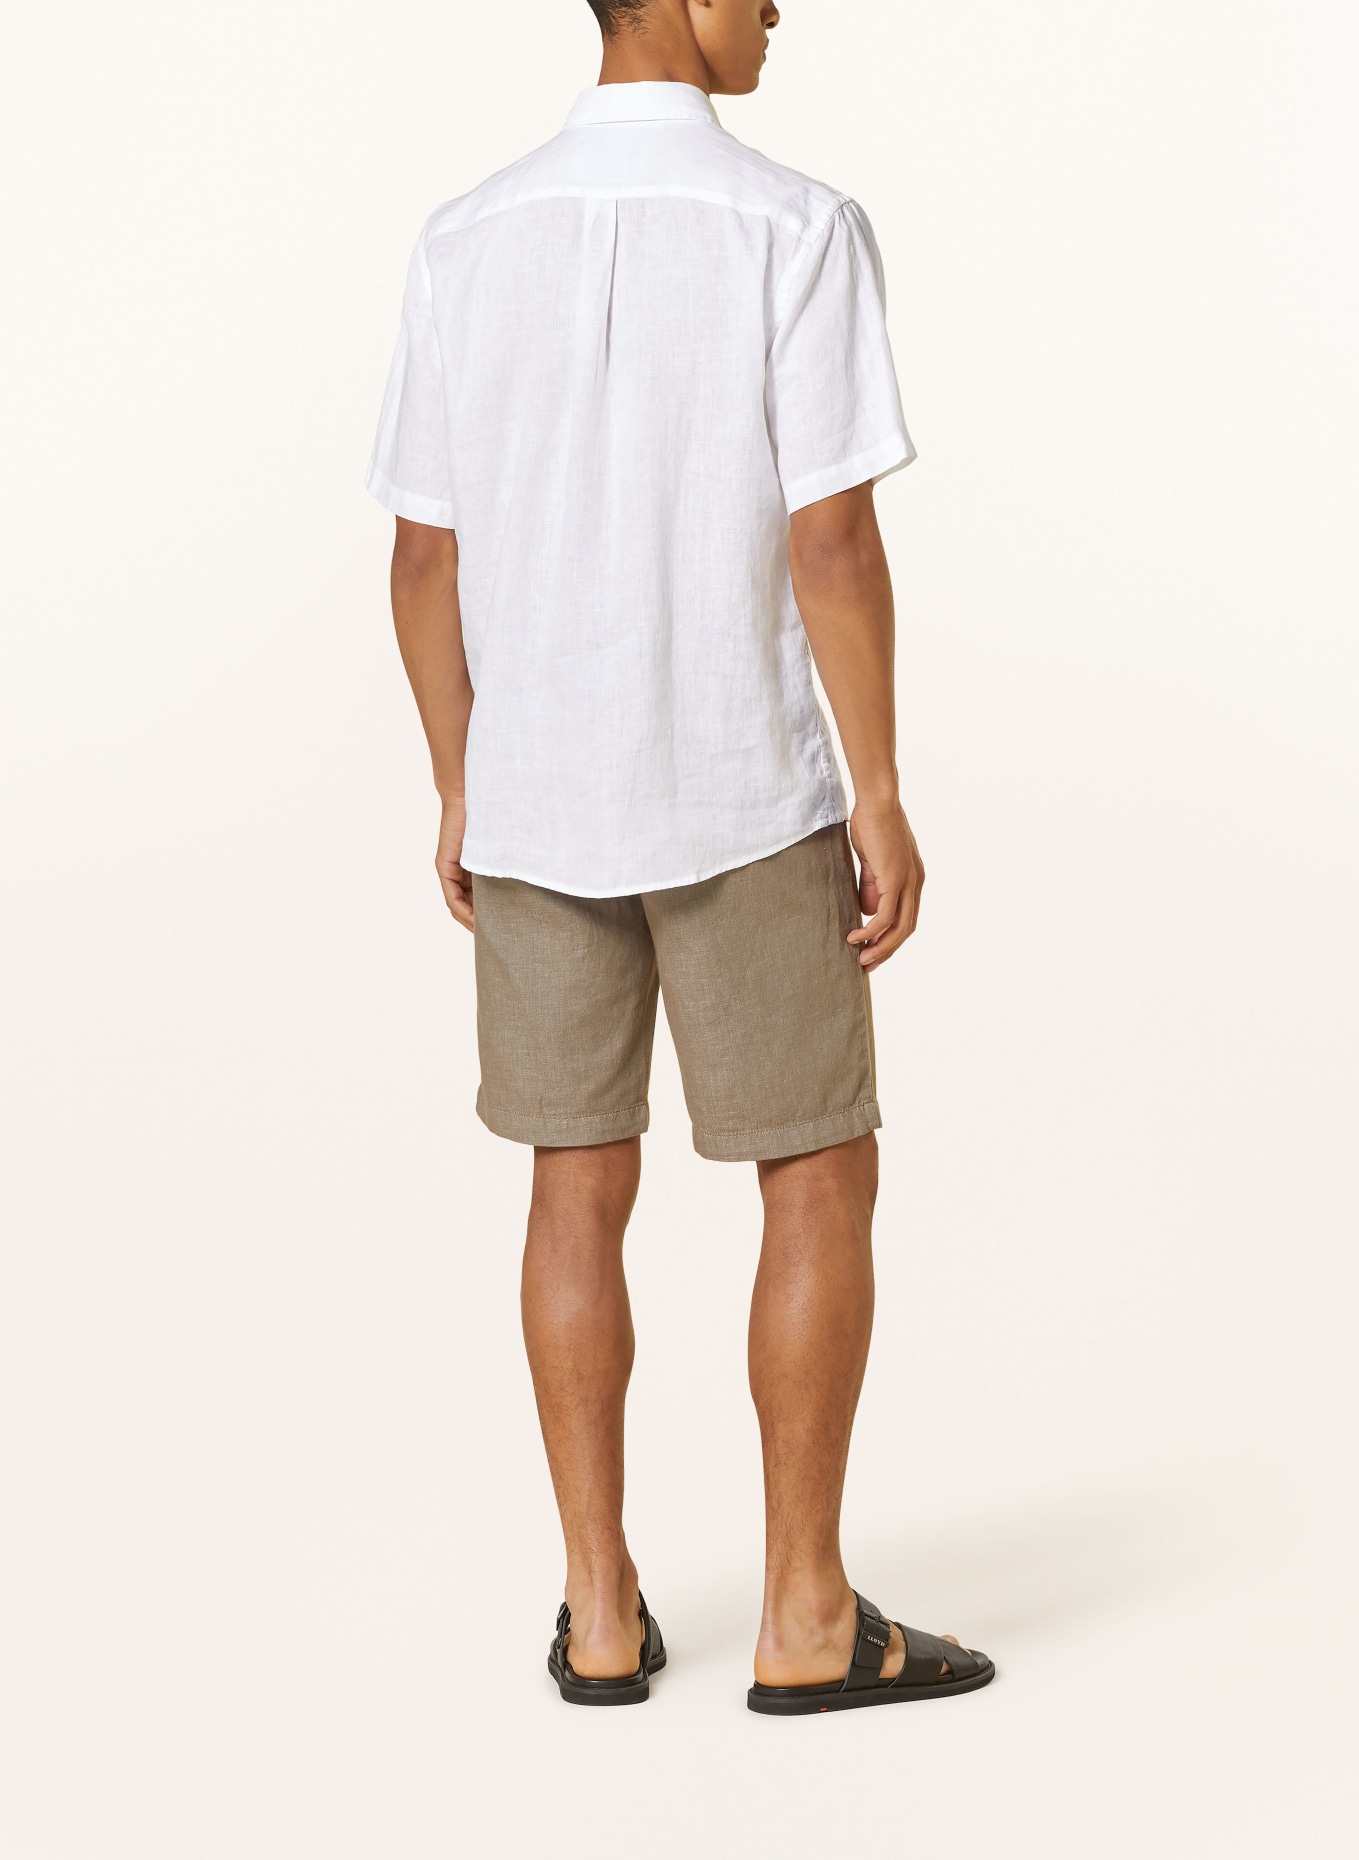 FYNCH-HATTON Short sleeve shirt comfort fit in linen, Color: WHITE (Image 3)